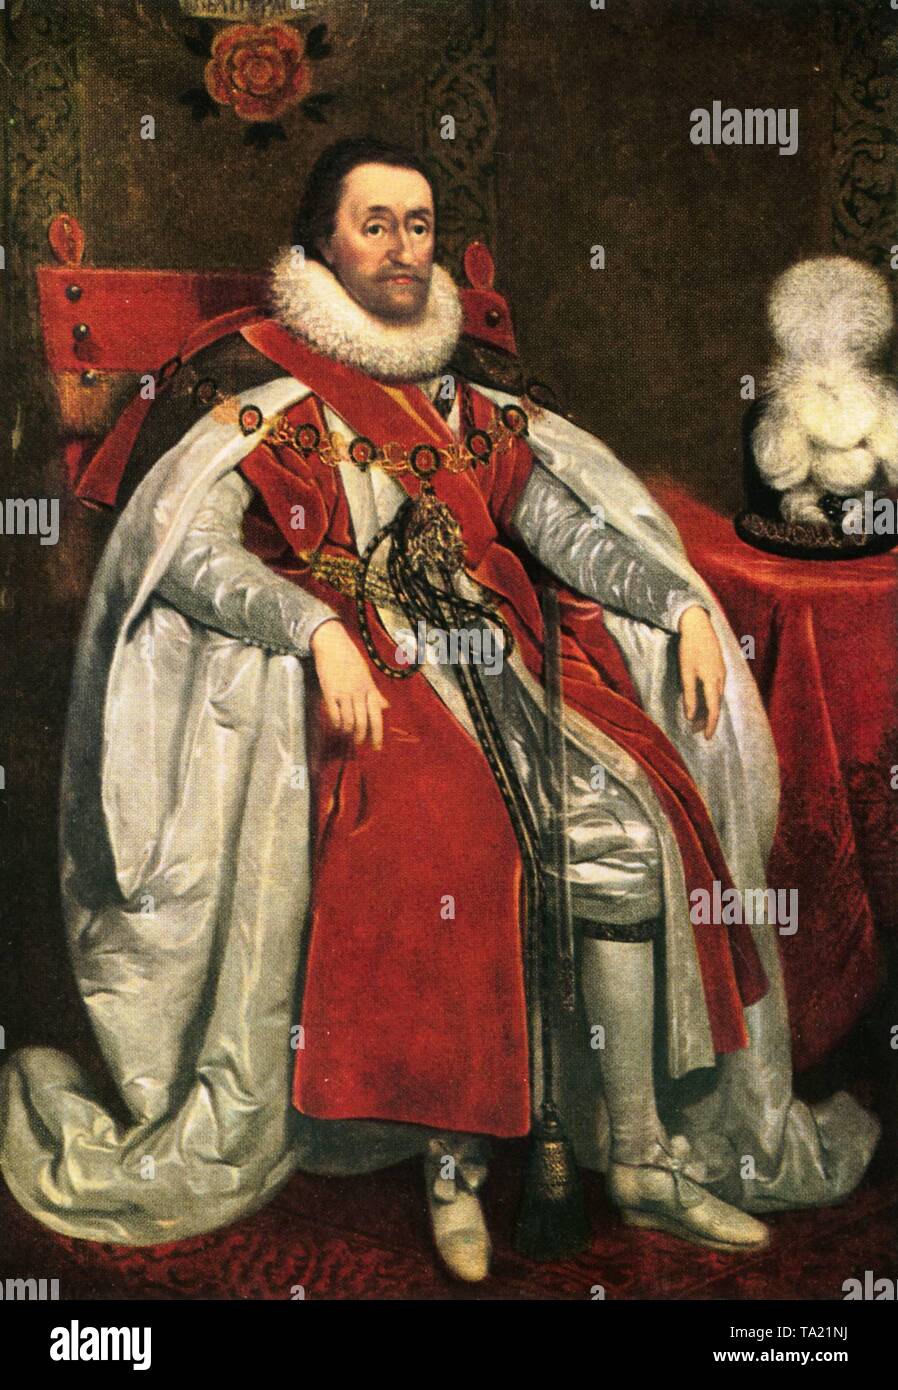 Portrait of James VI and I (King of Scotland as James VI and King of England and Ireland as James I) by painter Daniel Mytens Stock Photo